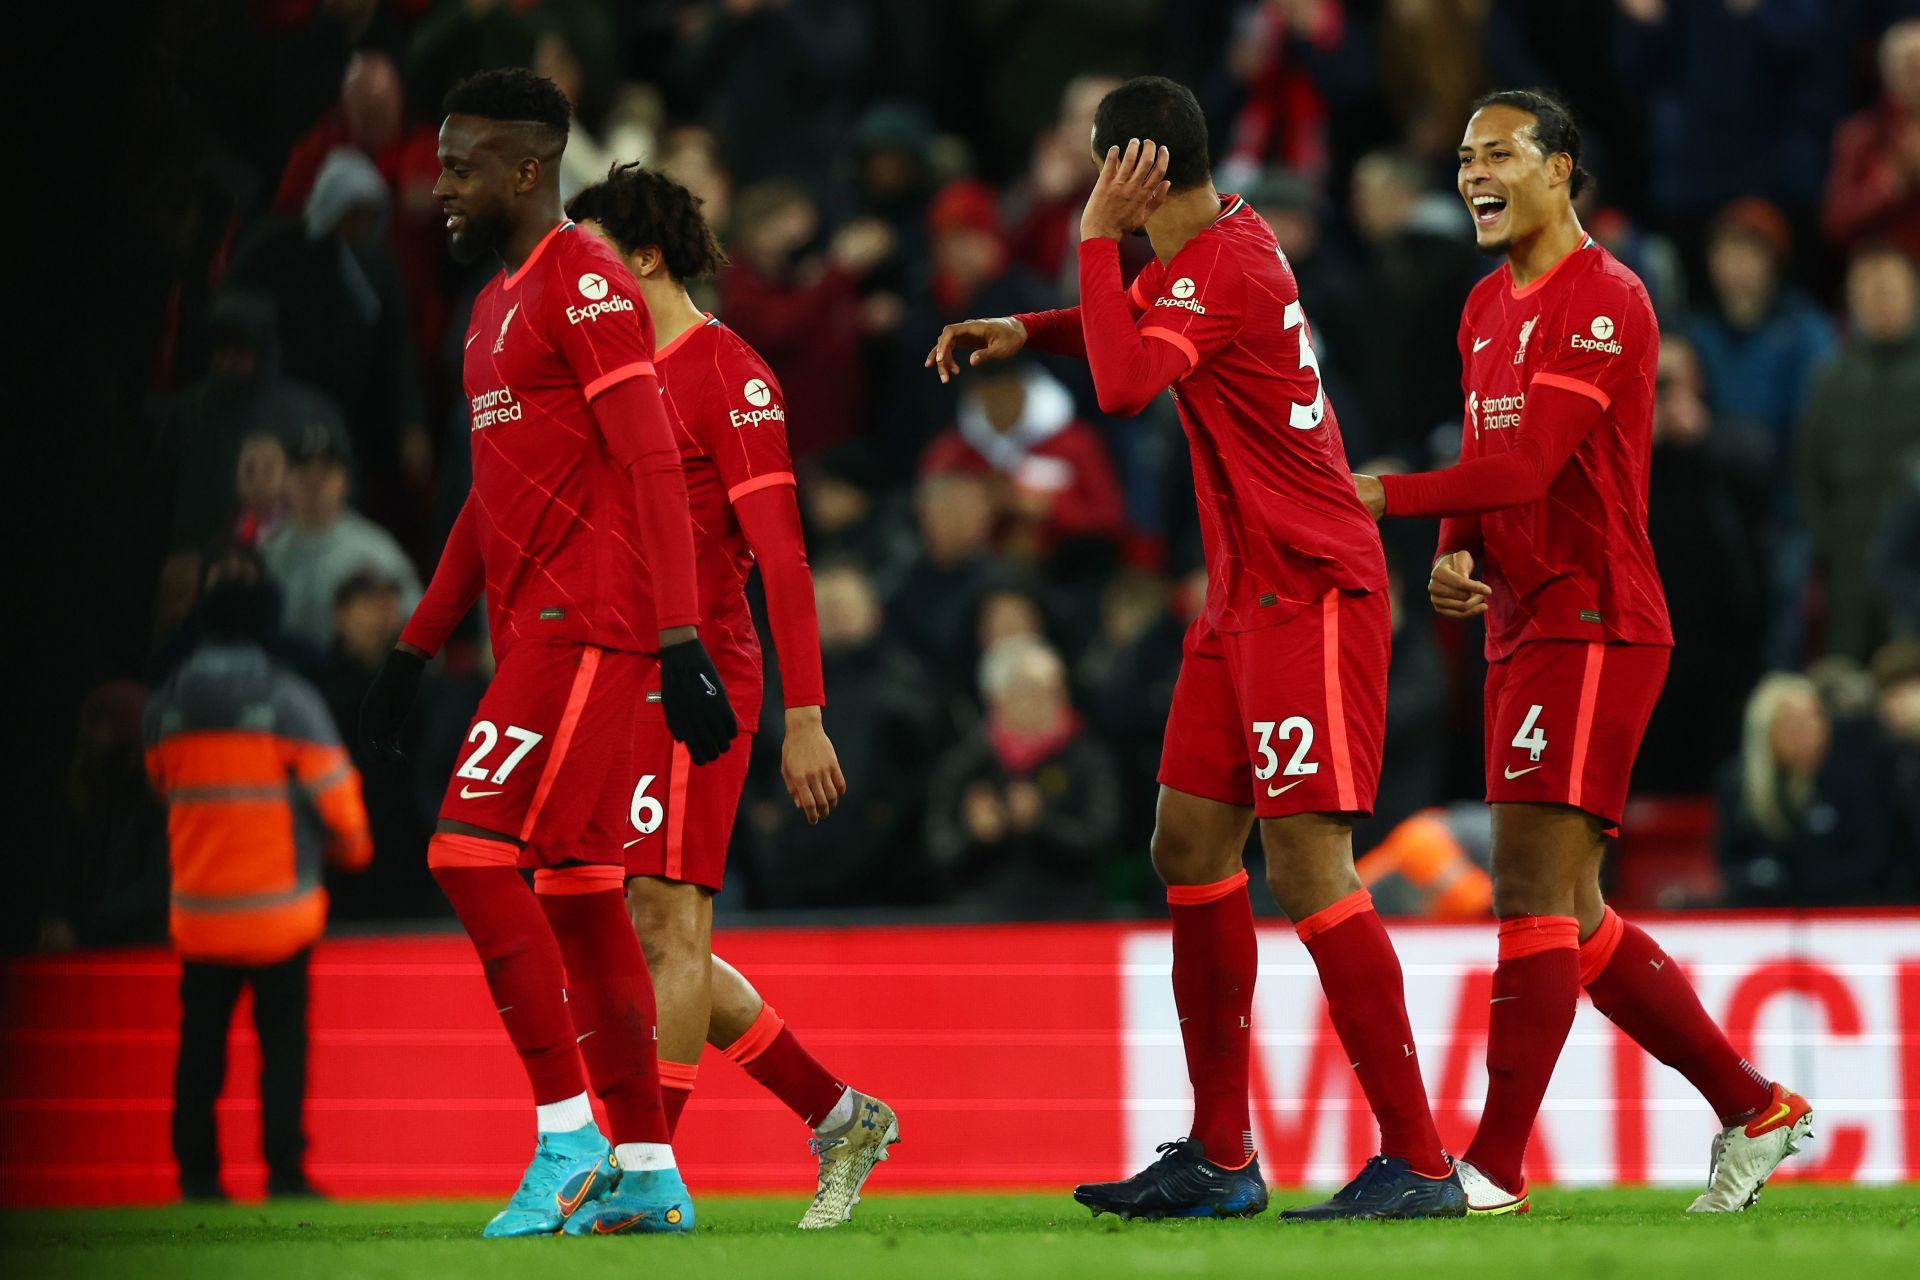 Liverpool were unstoppable against Leeds United in the Premier League.